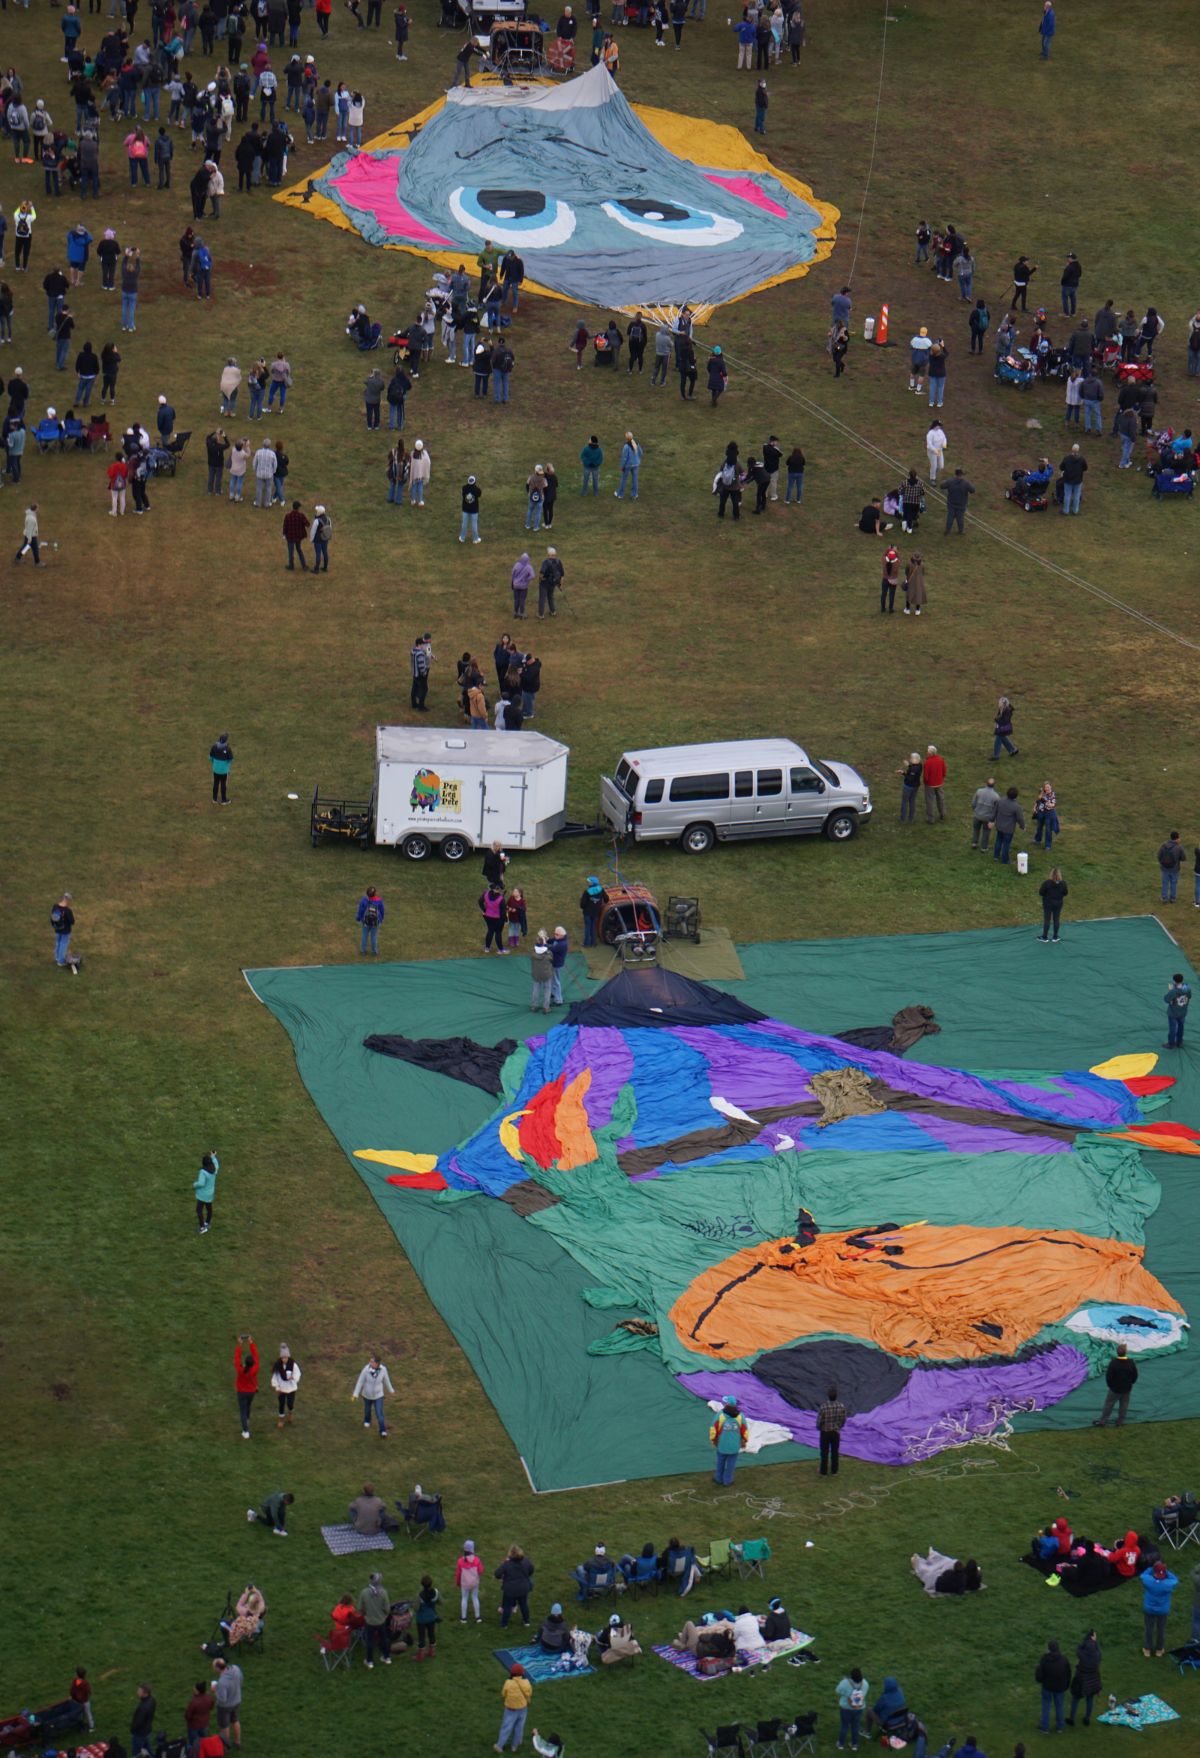 A group of people experiencing a balloon festival.